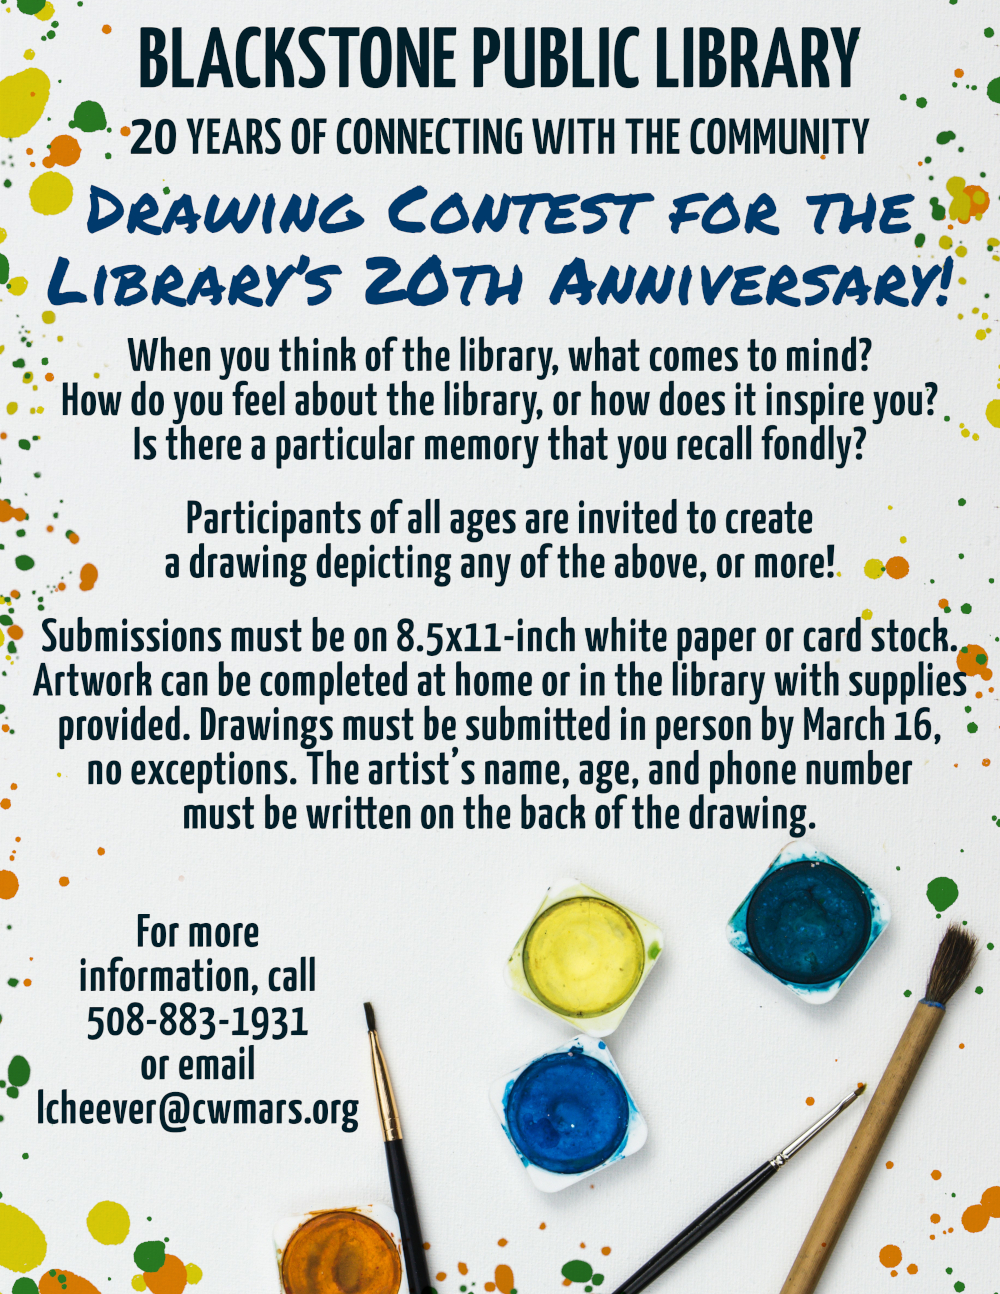 Blackstone Public Library, 20 Years of Connecting with the Community.  Drawing Contest for the Library’s 20th Anniversary!  Flyer text is over a white canvas-textured background with colorful paint splatters decorating the edges. In the bottom right corner of the image is a selection of paint brushes and containers filled with paint.  When you think of the library, what comes to mind? How do you feel about the library, or how does it inspire you? Is there a particular memory that you recall fondly? Participants of all ages are invited to create a drawing depicting any of the above, or more!  Submissions must be on 8.5x11-inch white paper or card stock. Artwork can be completed at home or in the library with supplies provided. Drawings must be submitted in person by March 16, no exceptions. The artist’s name, age, and phone number must be written on the back of the drawing.  For more information, call 508-883-1931 or email lcheever@cwmars.org. 